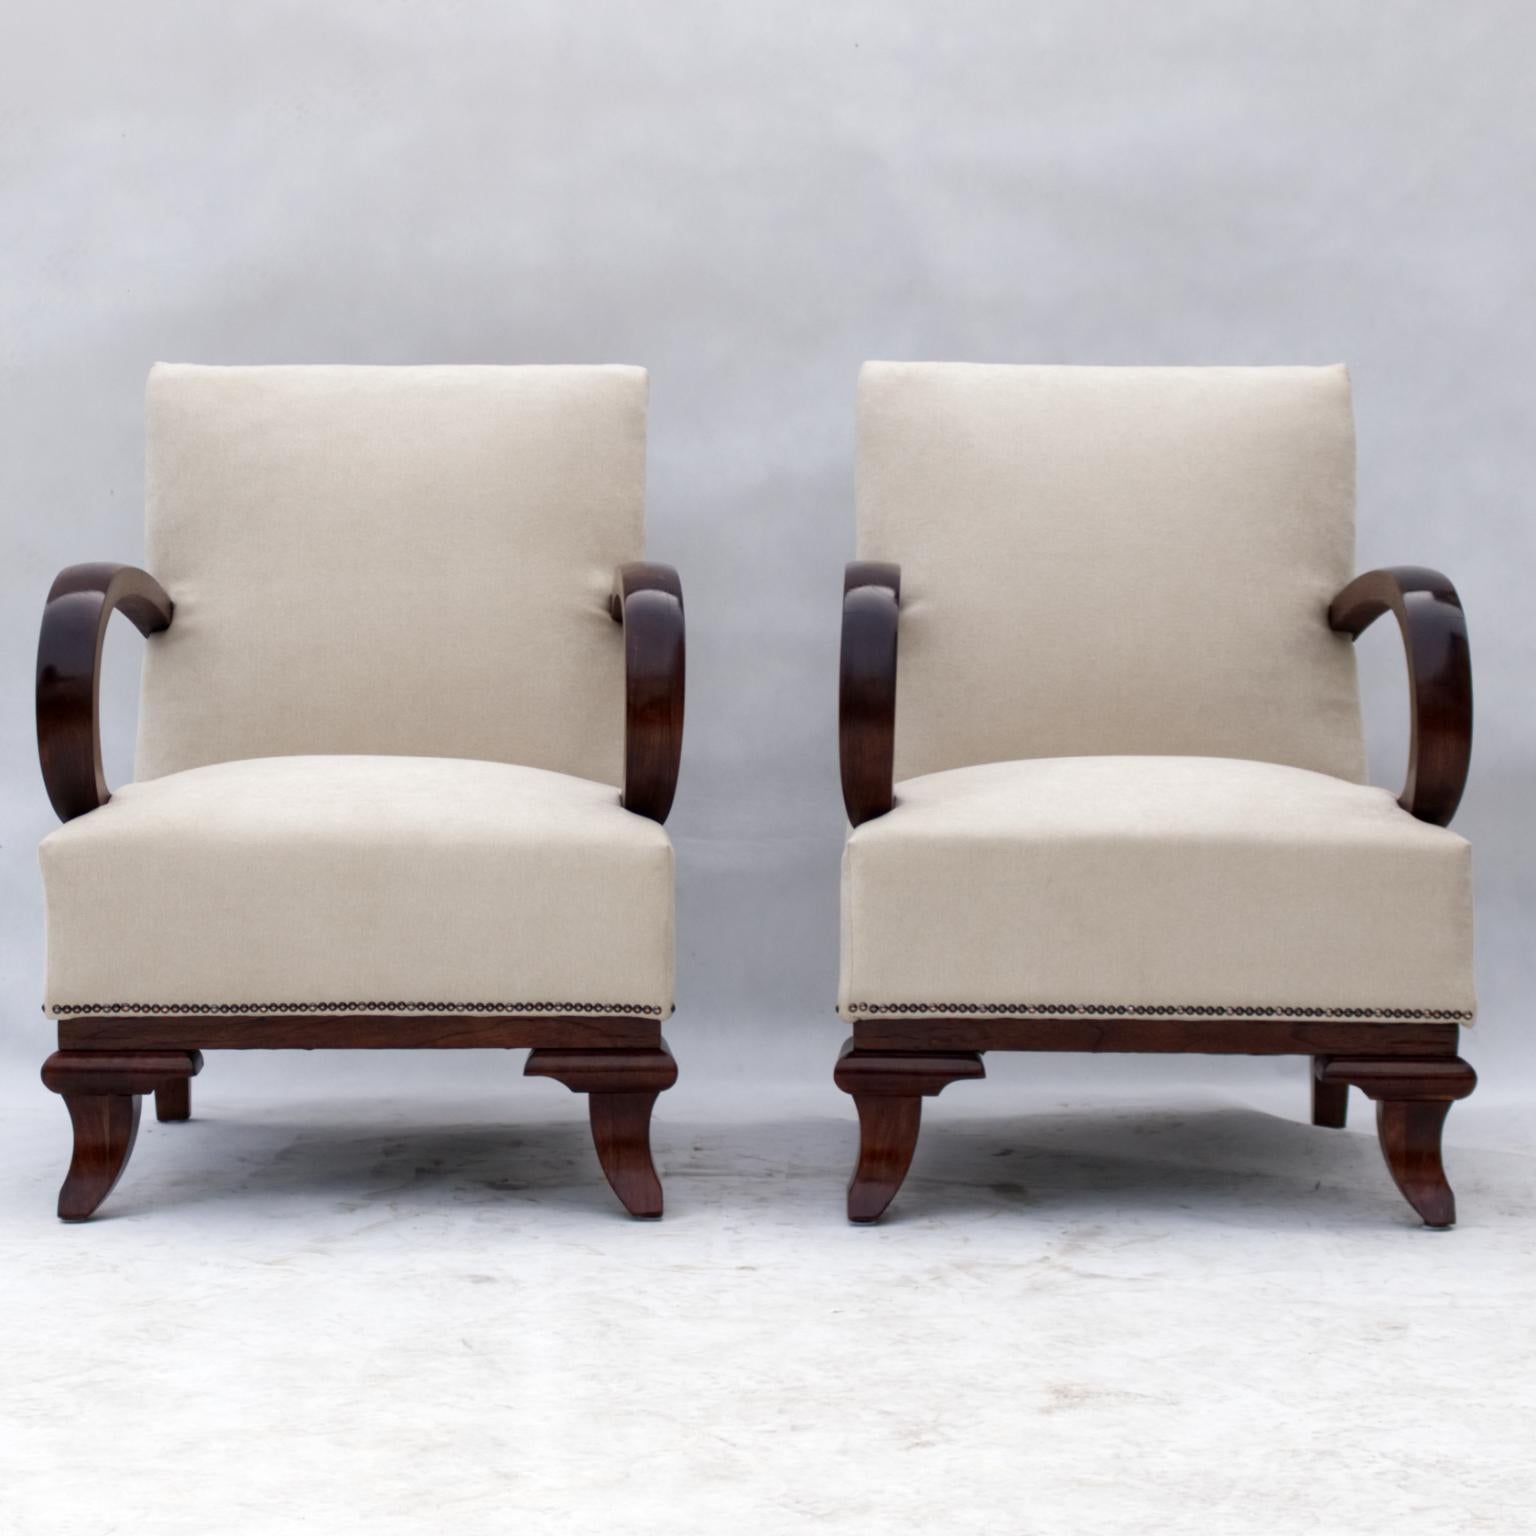 Fully restored pair of Art Deco armchairs in new upholstery and wood arms and legs.

Attributed to Lajos Kozma.